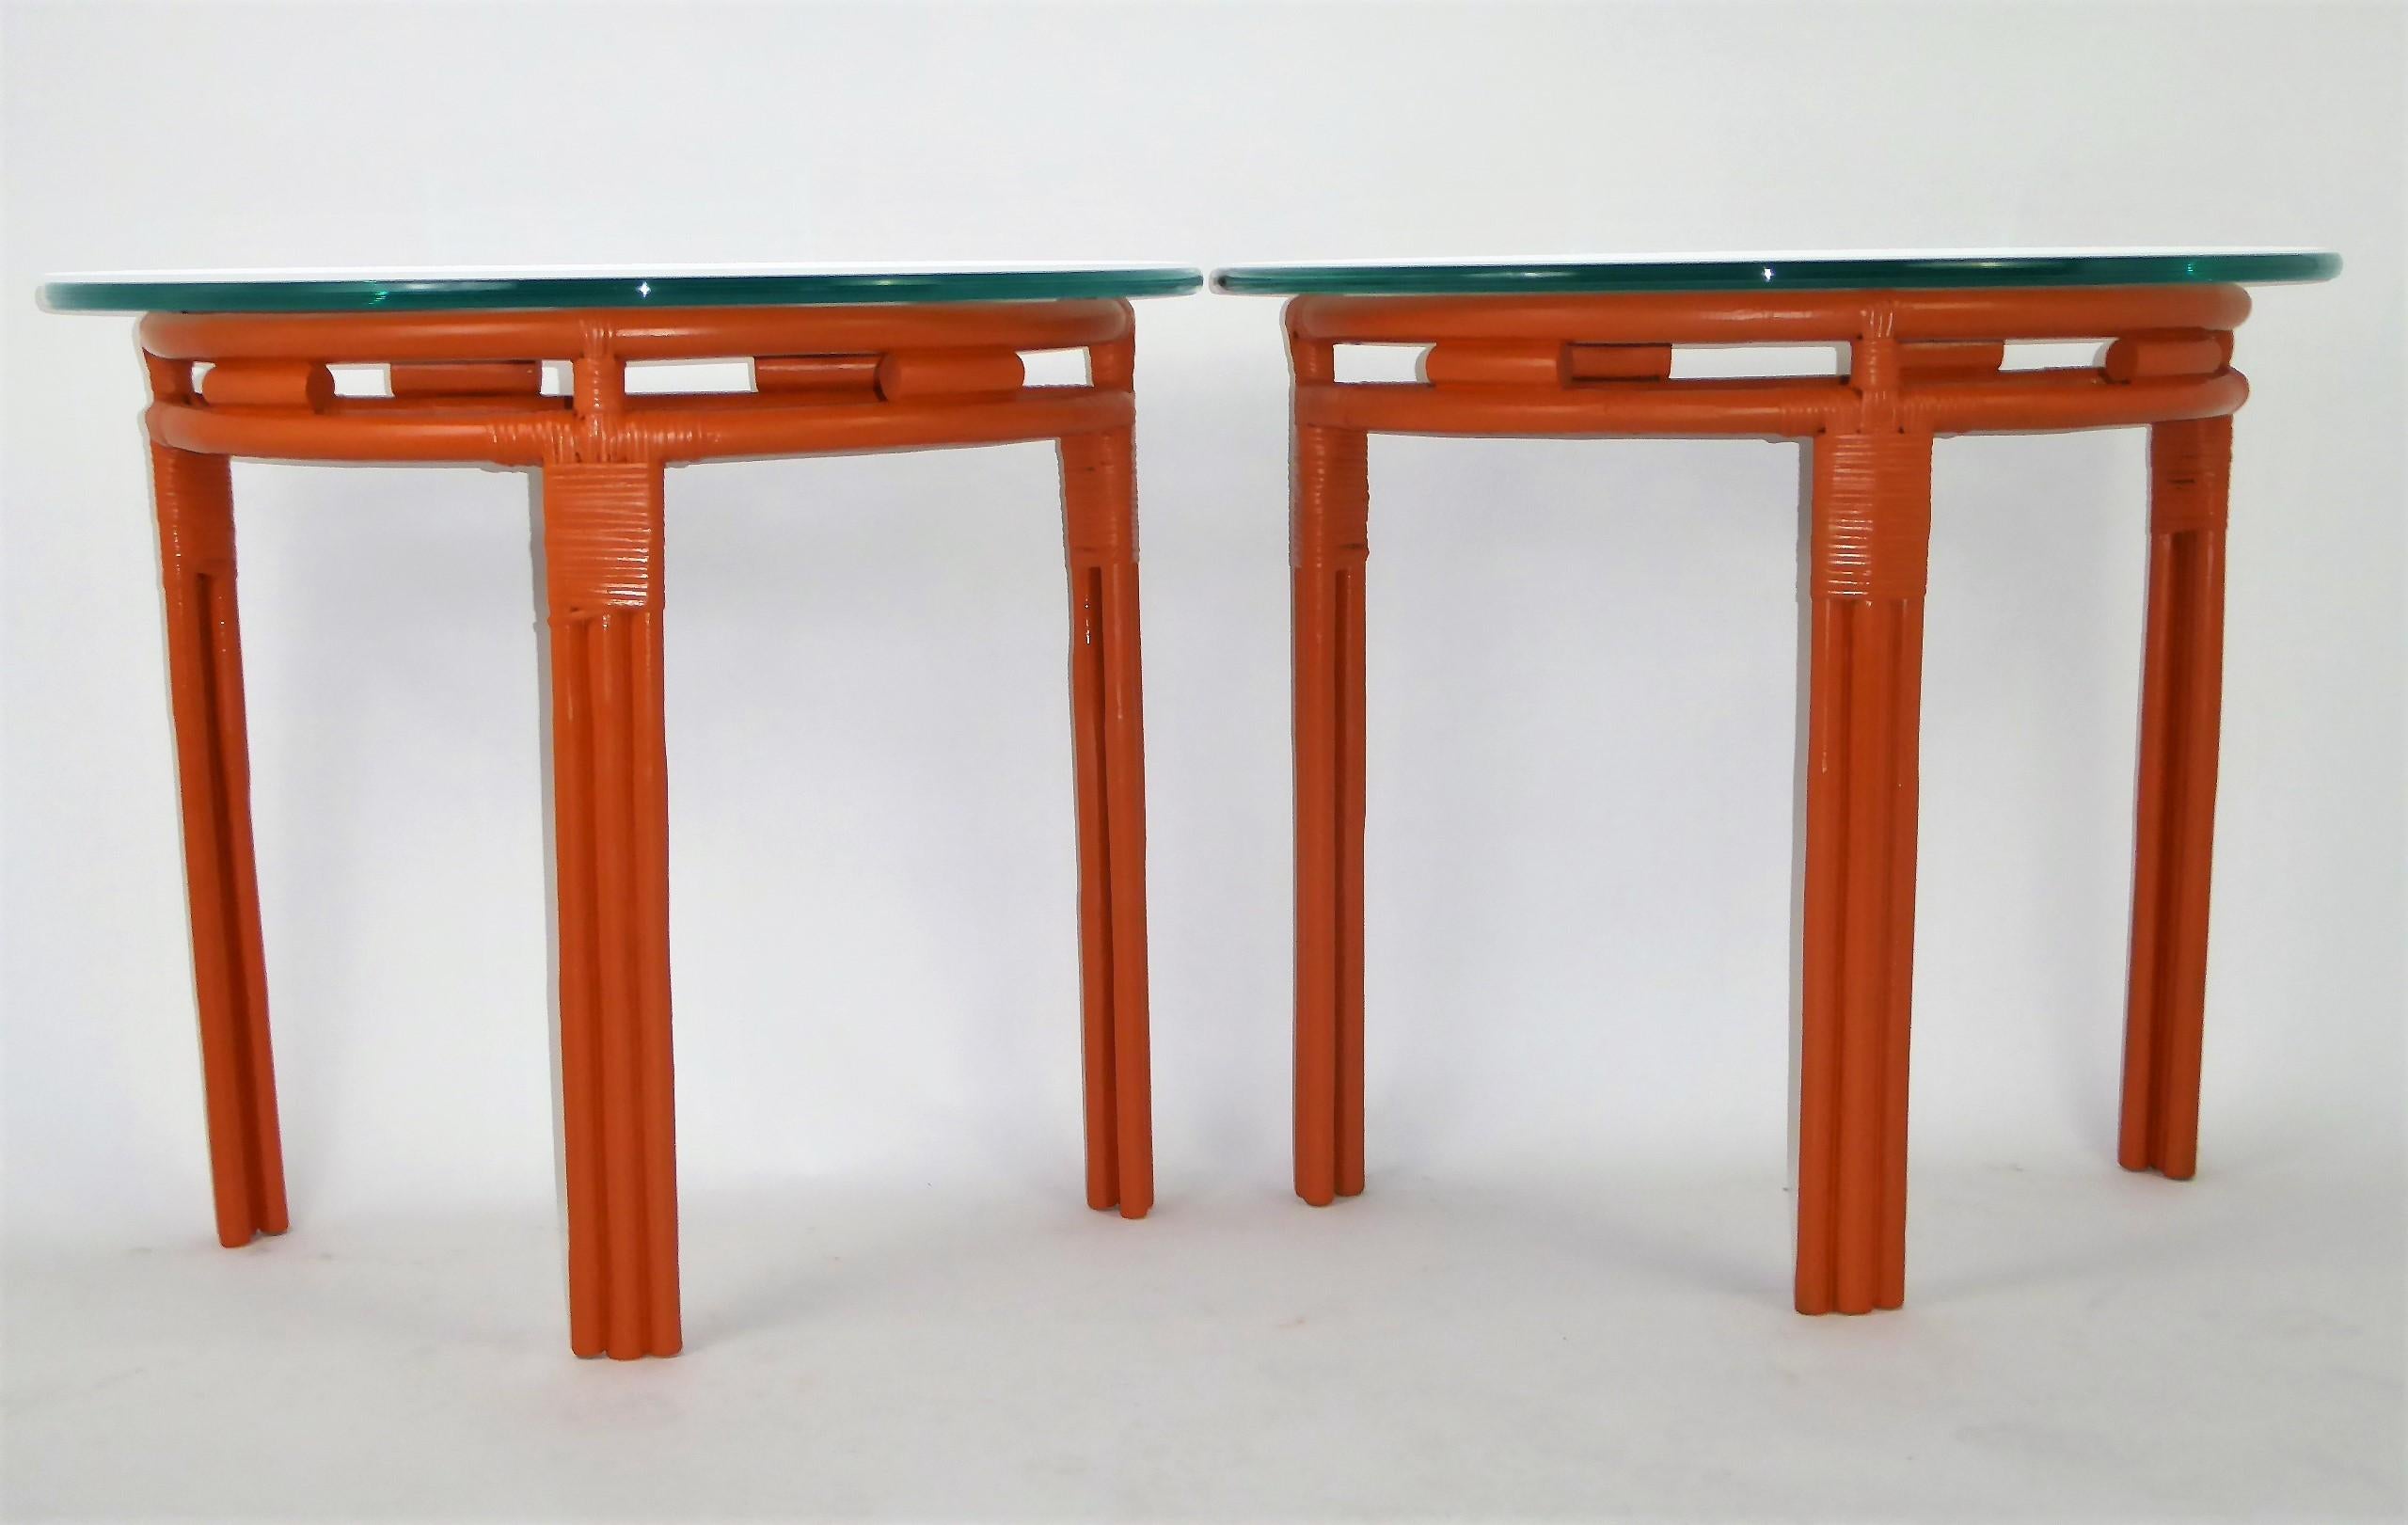 1940s Painted Rattan Demilune Glass Top Consoles in Hermes Orange 8